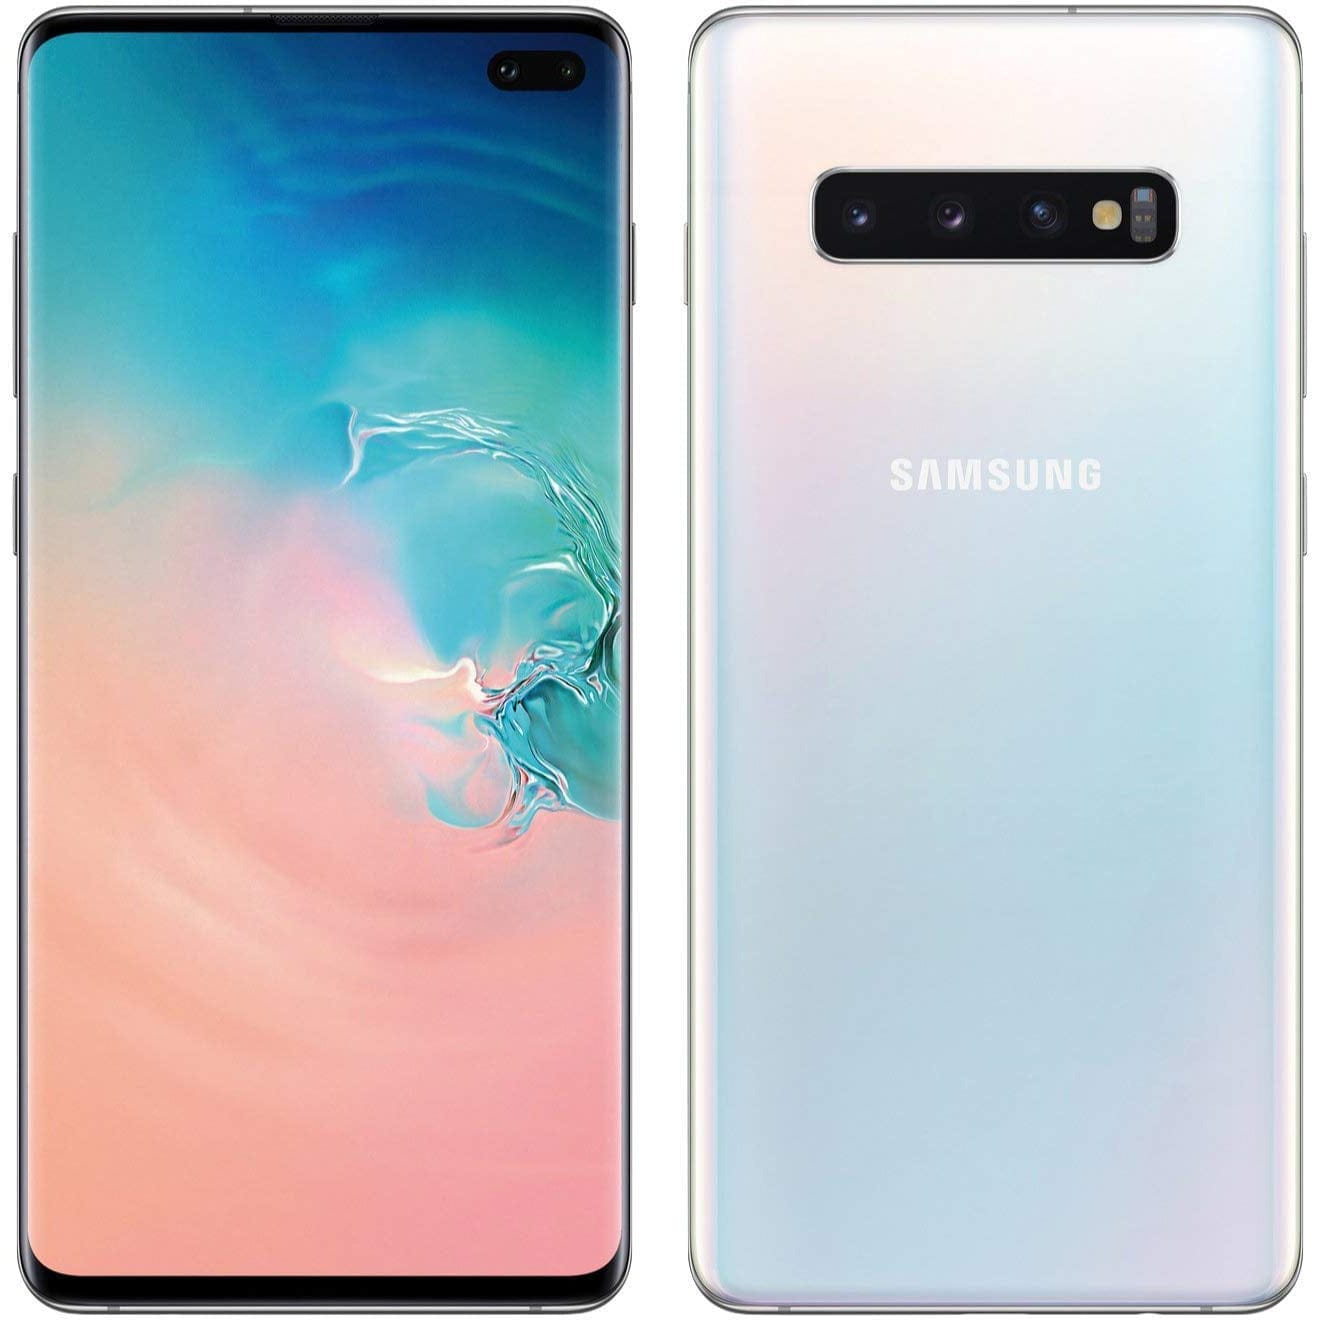 Samsung Galaxy S10+ - 128 GB - White Prism - AT&T - GSM